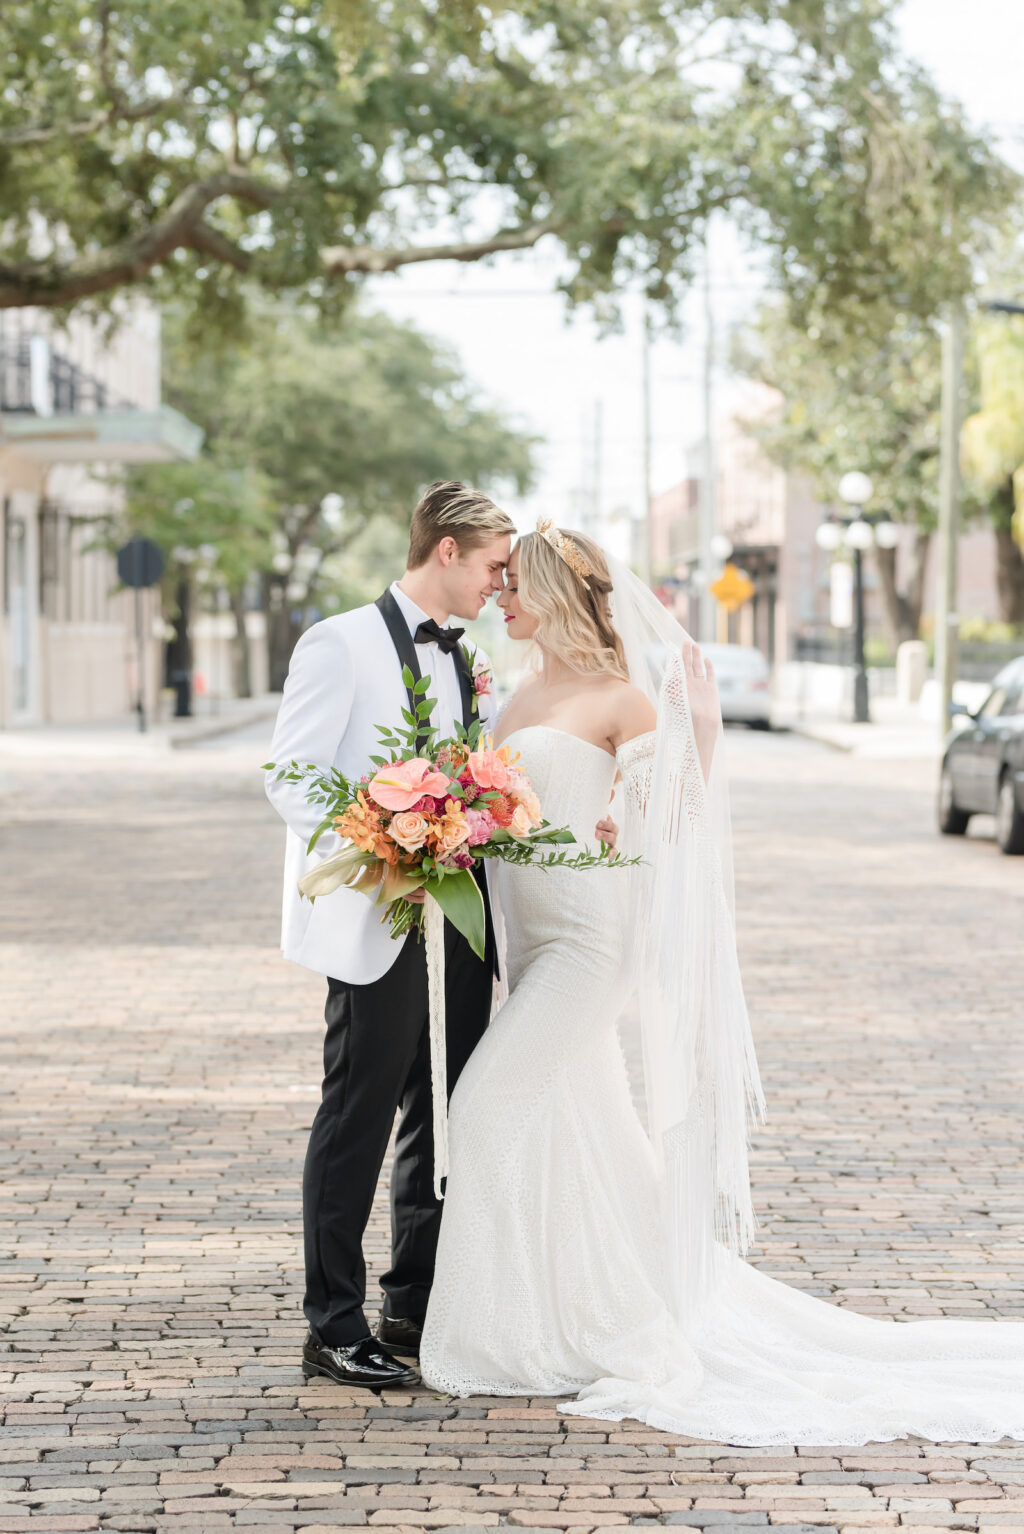 Vintage Bride Wearing Lace Strapless Sweetheart Neckline Fringe Off the Shoulder Sleeve Wedding Dress with Train, Gold Flower Crown Holding Colorful Tropical Floral Bouquet with Groom in White and Black Collar Tuxedo Standing in Streets of Tampa | Wedding Hair and Makeup Adore Bridal Hair and Makeup